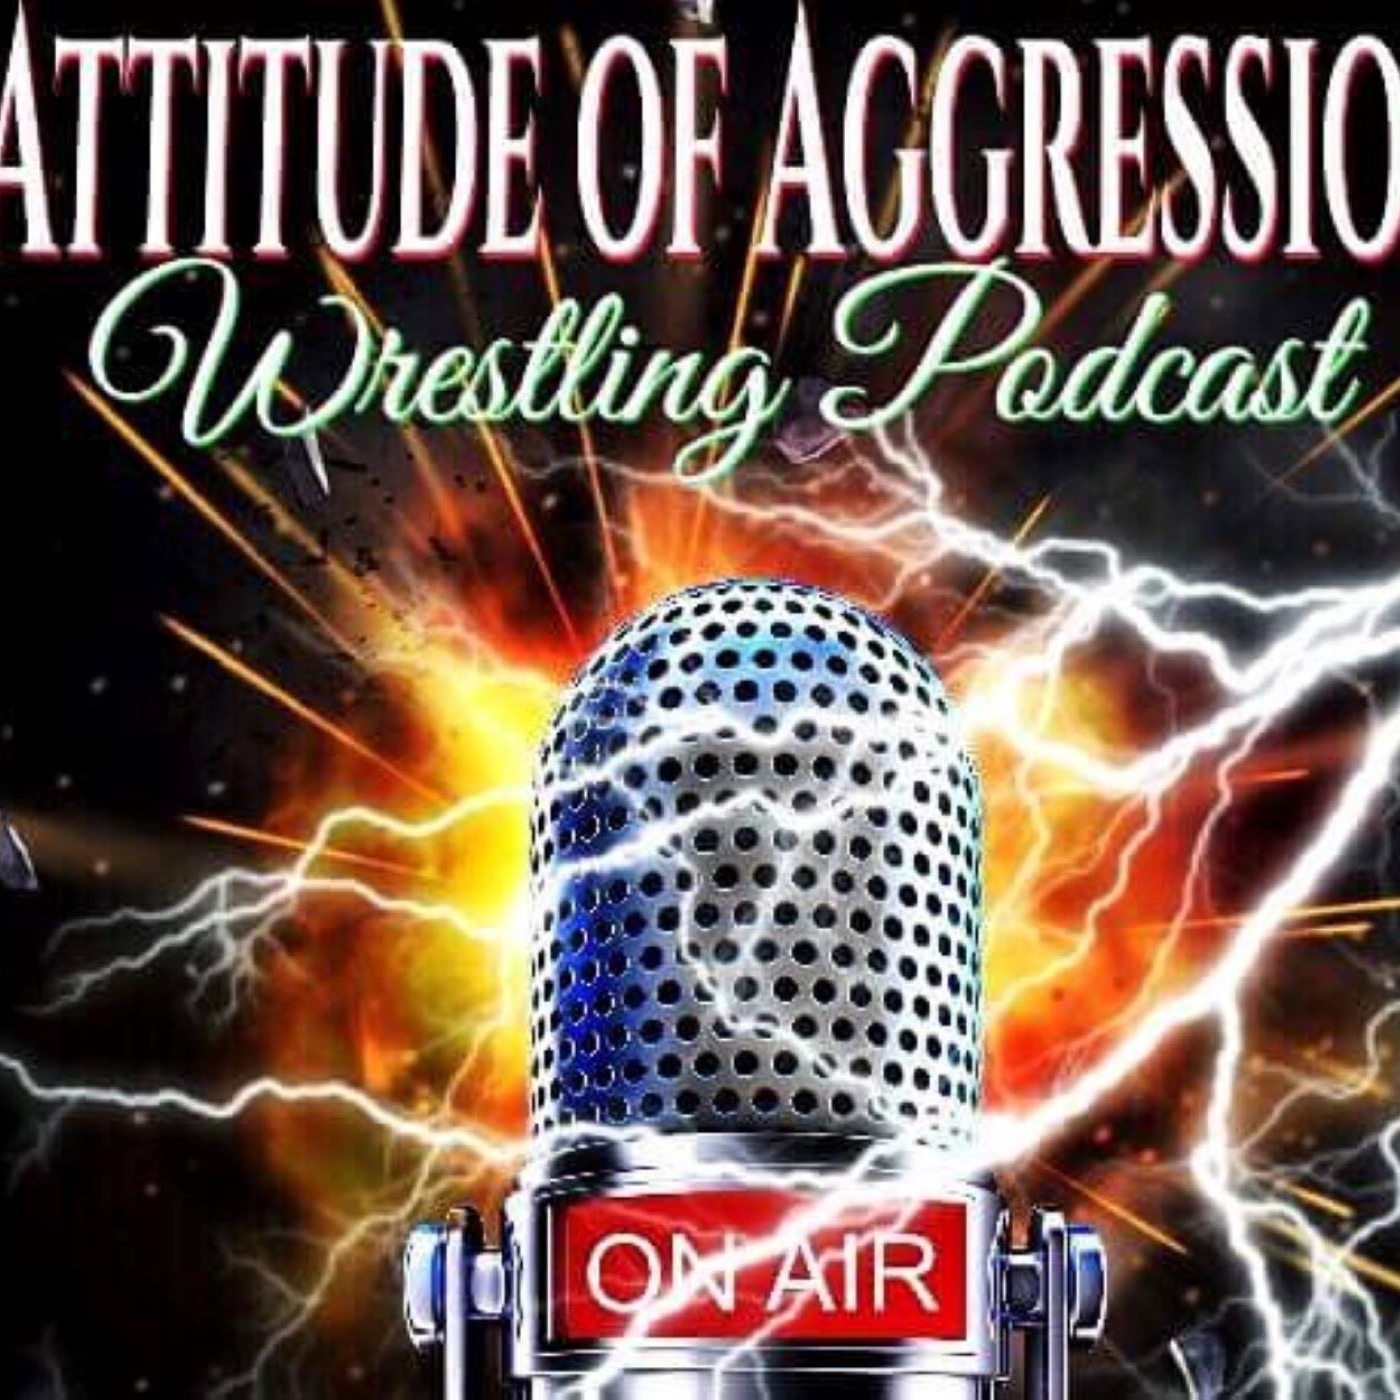 Attitude Of Aggression #288- The Big Four Project: Summer Slam ’92